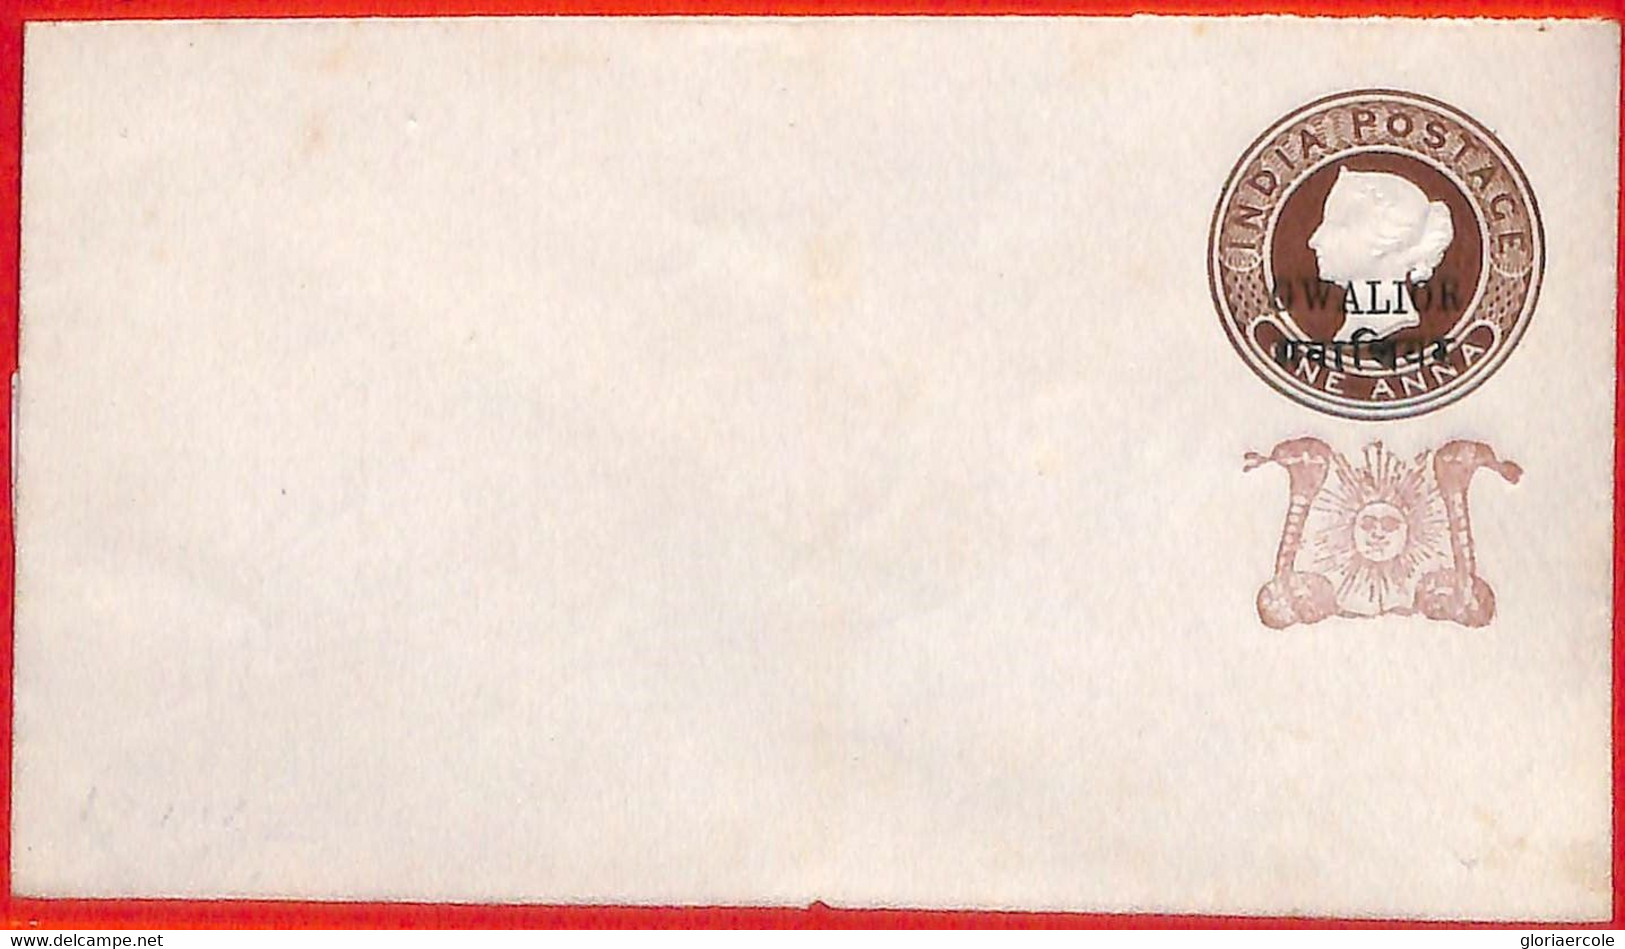 Aa2411 - INDIA  Gwalior State - Postal History - STATIONERY COVER - H & G  #  7 - Gwalior